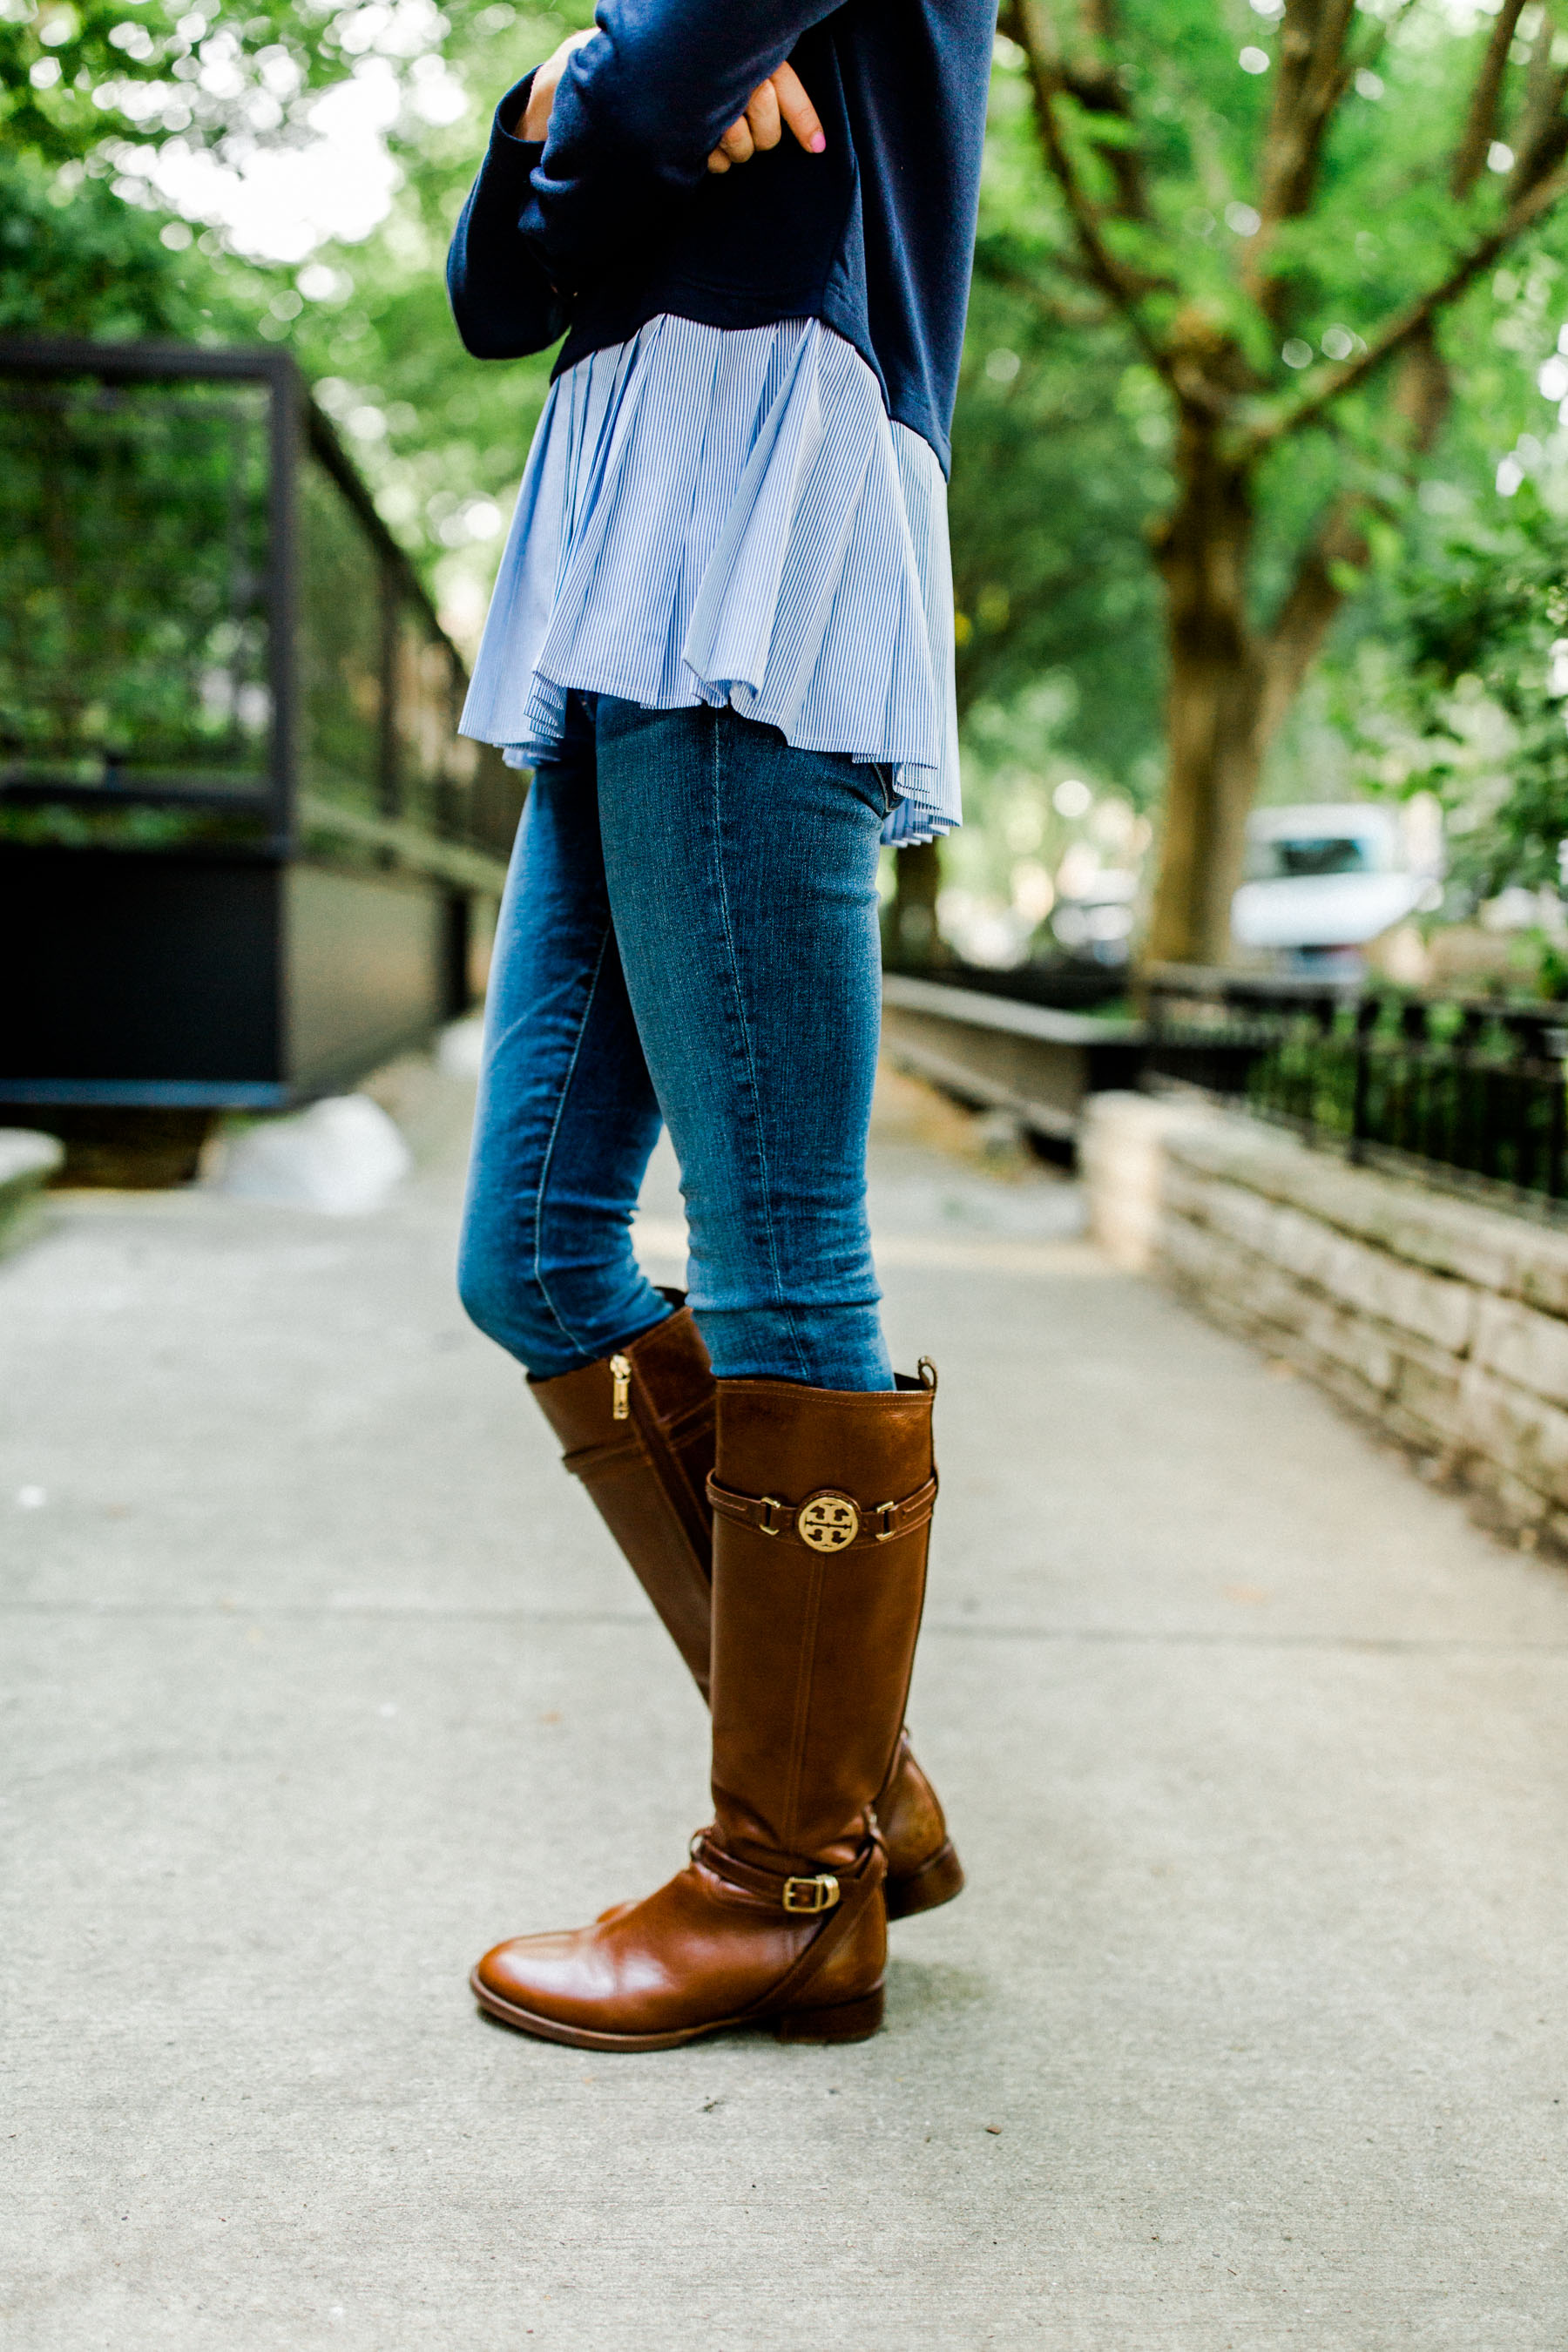  Tory Burch Boots